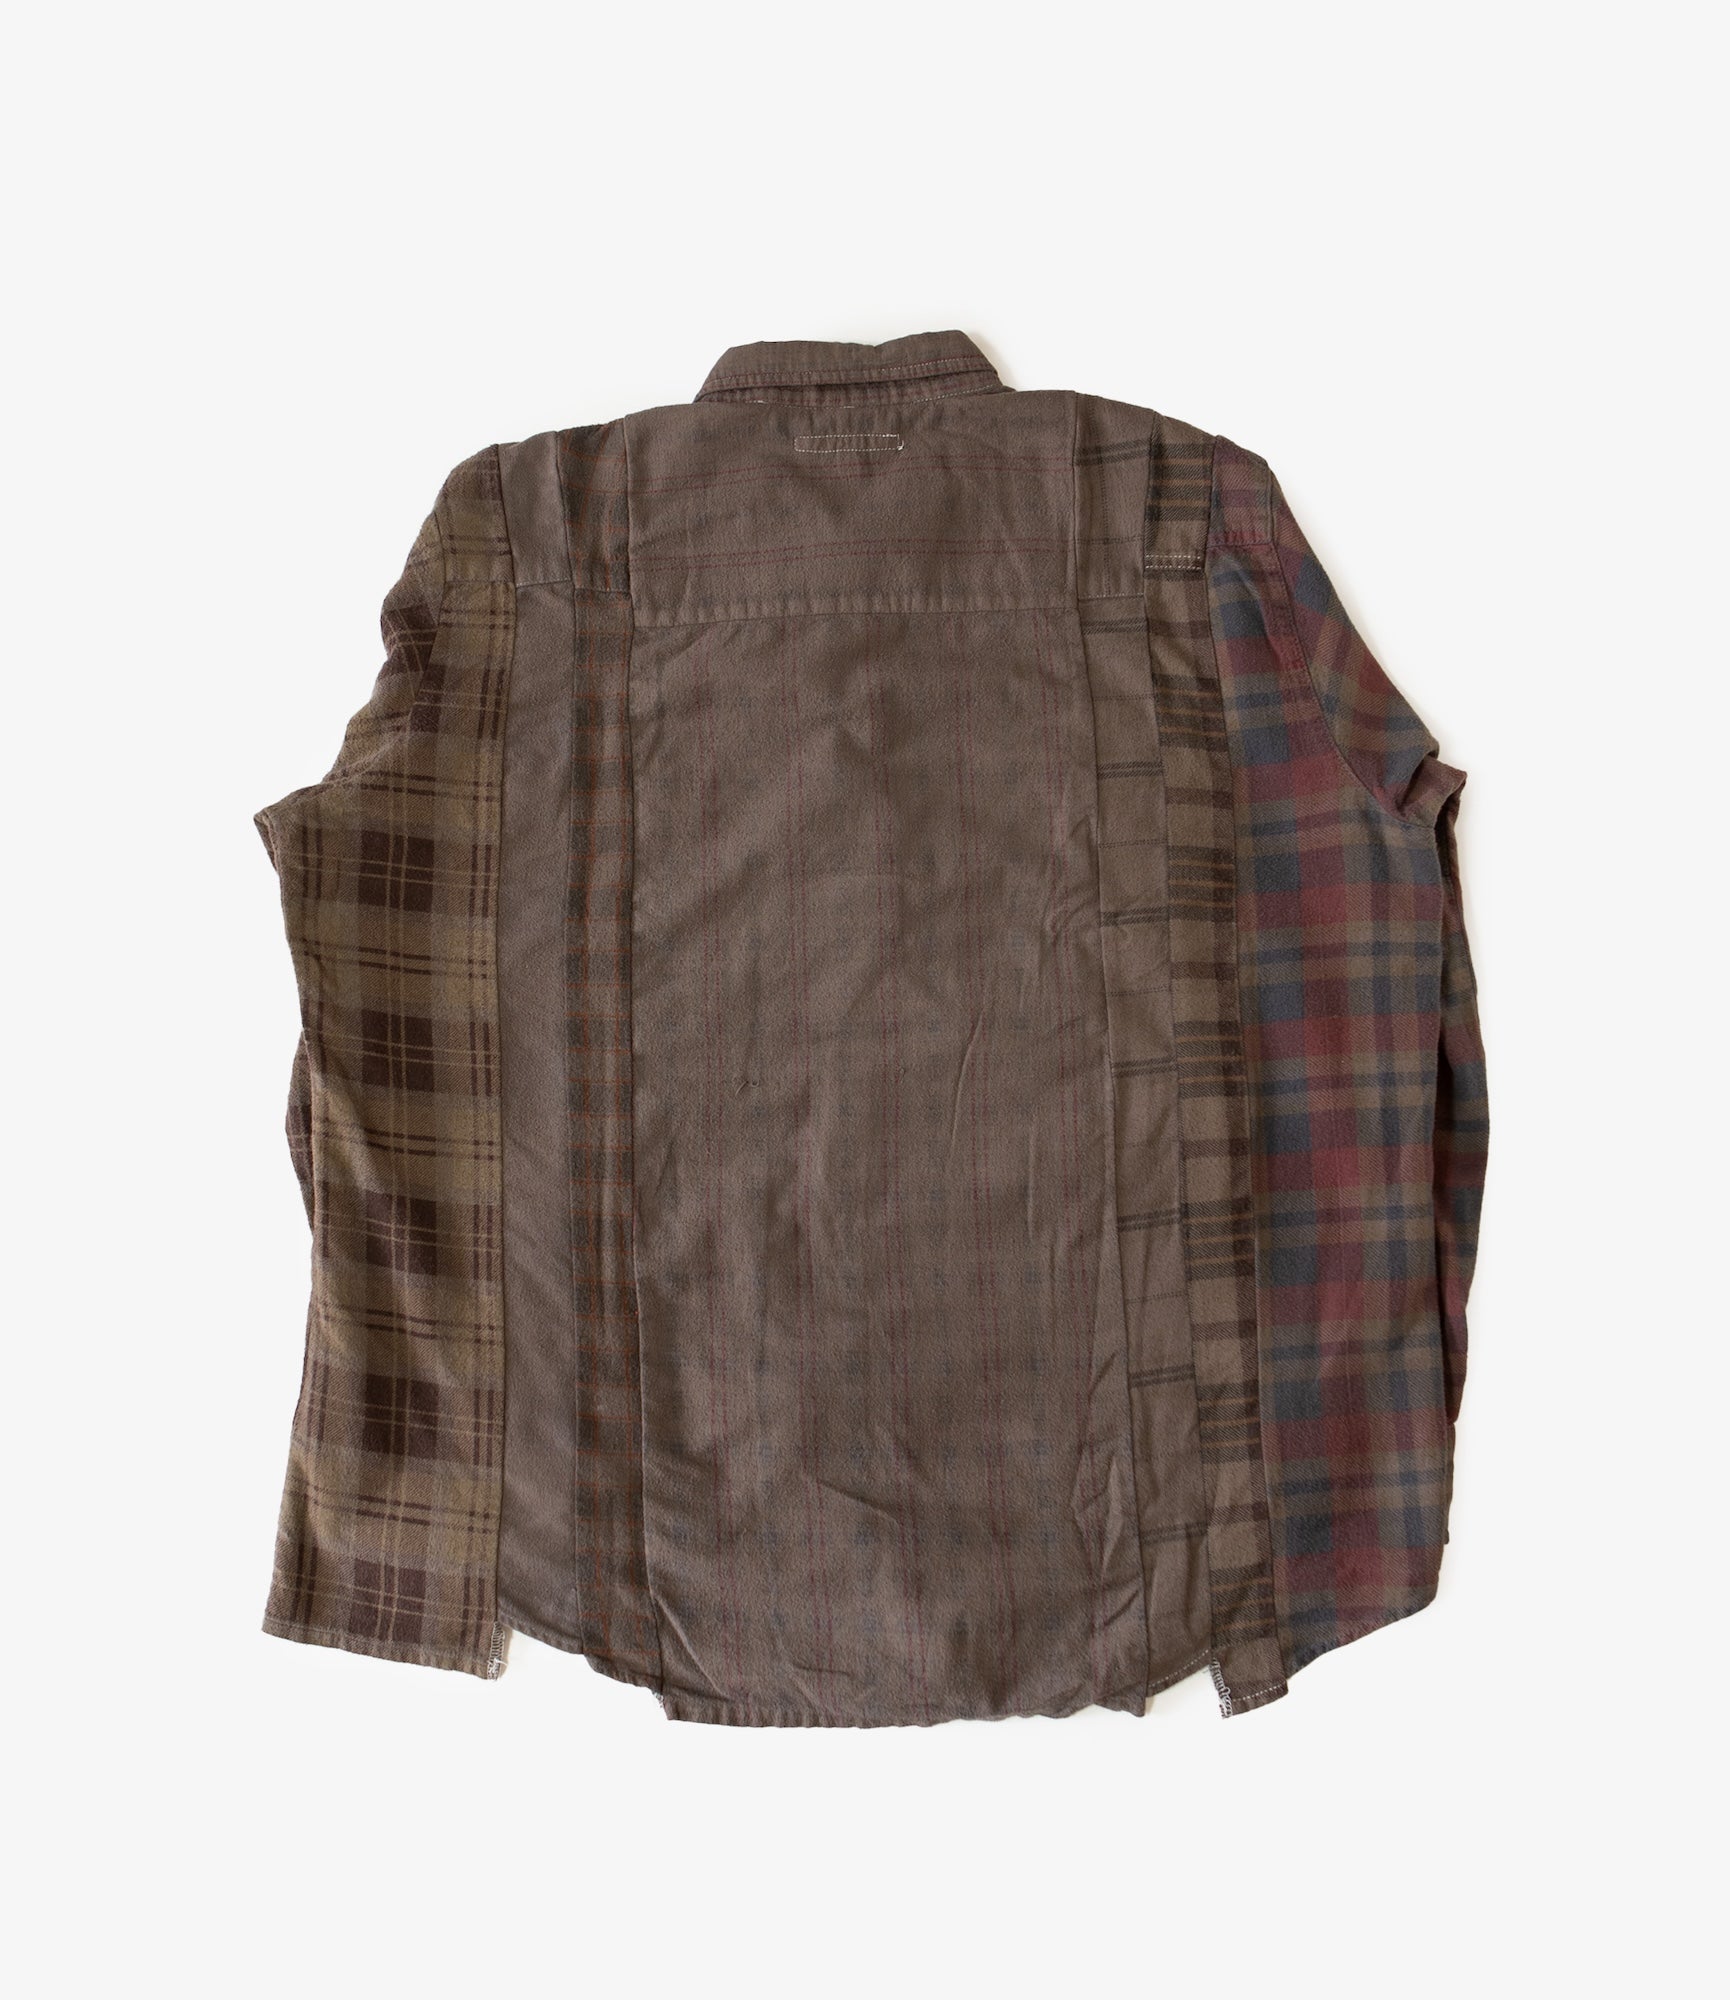 Rebuild by Needles Flannel Shirt - 7 Cuts Shirt / Over Dye - Brown